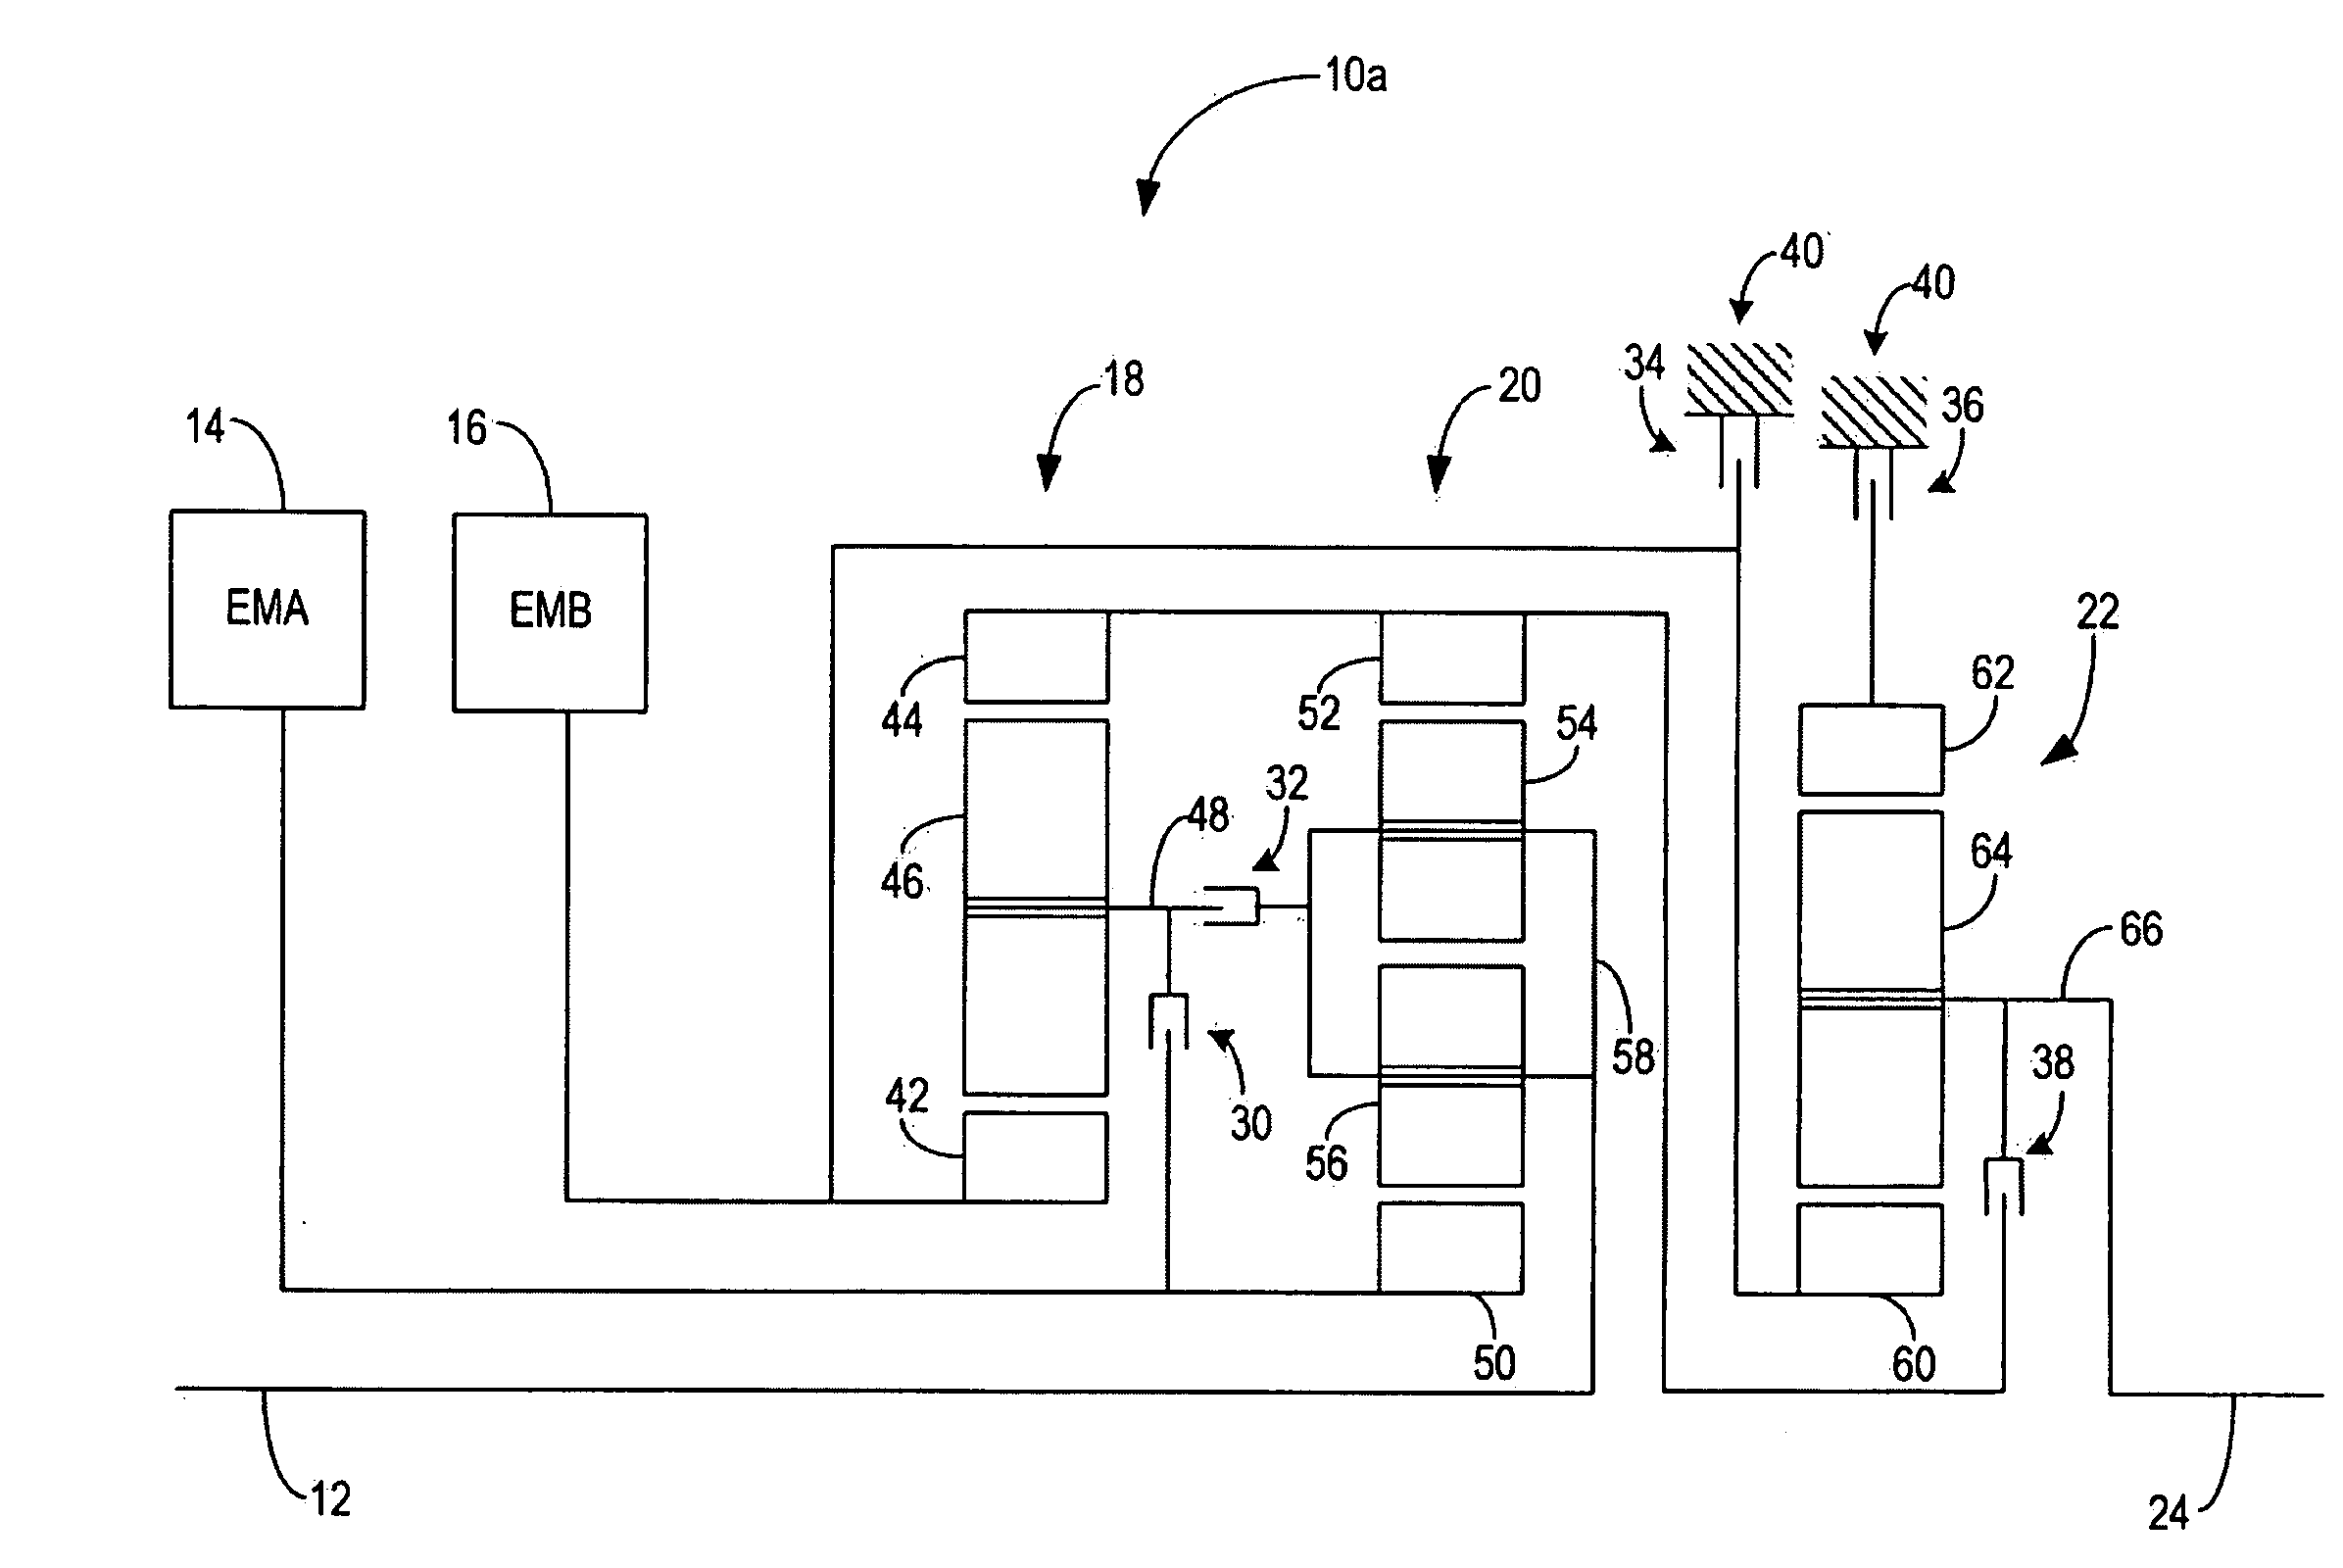 Electric variable transmission for hybrid electric vehicles with three forward modes, one reverse mode, and five fixed gears